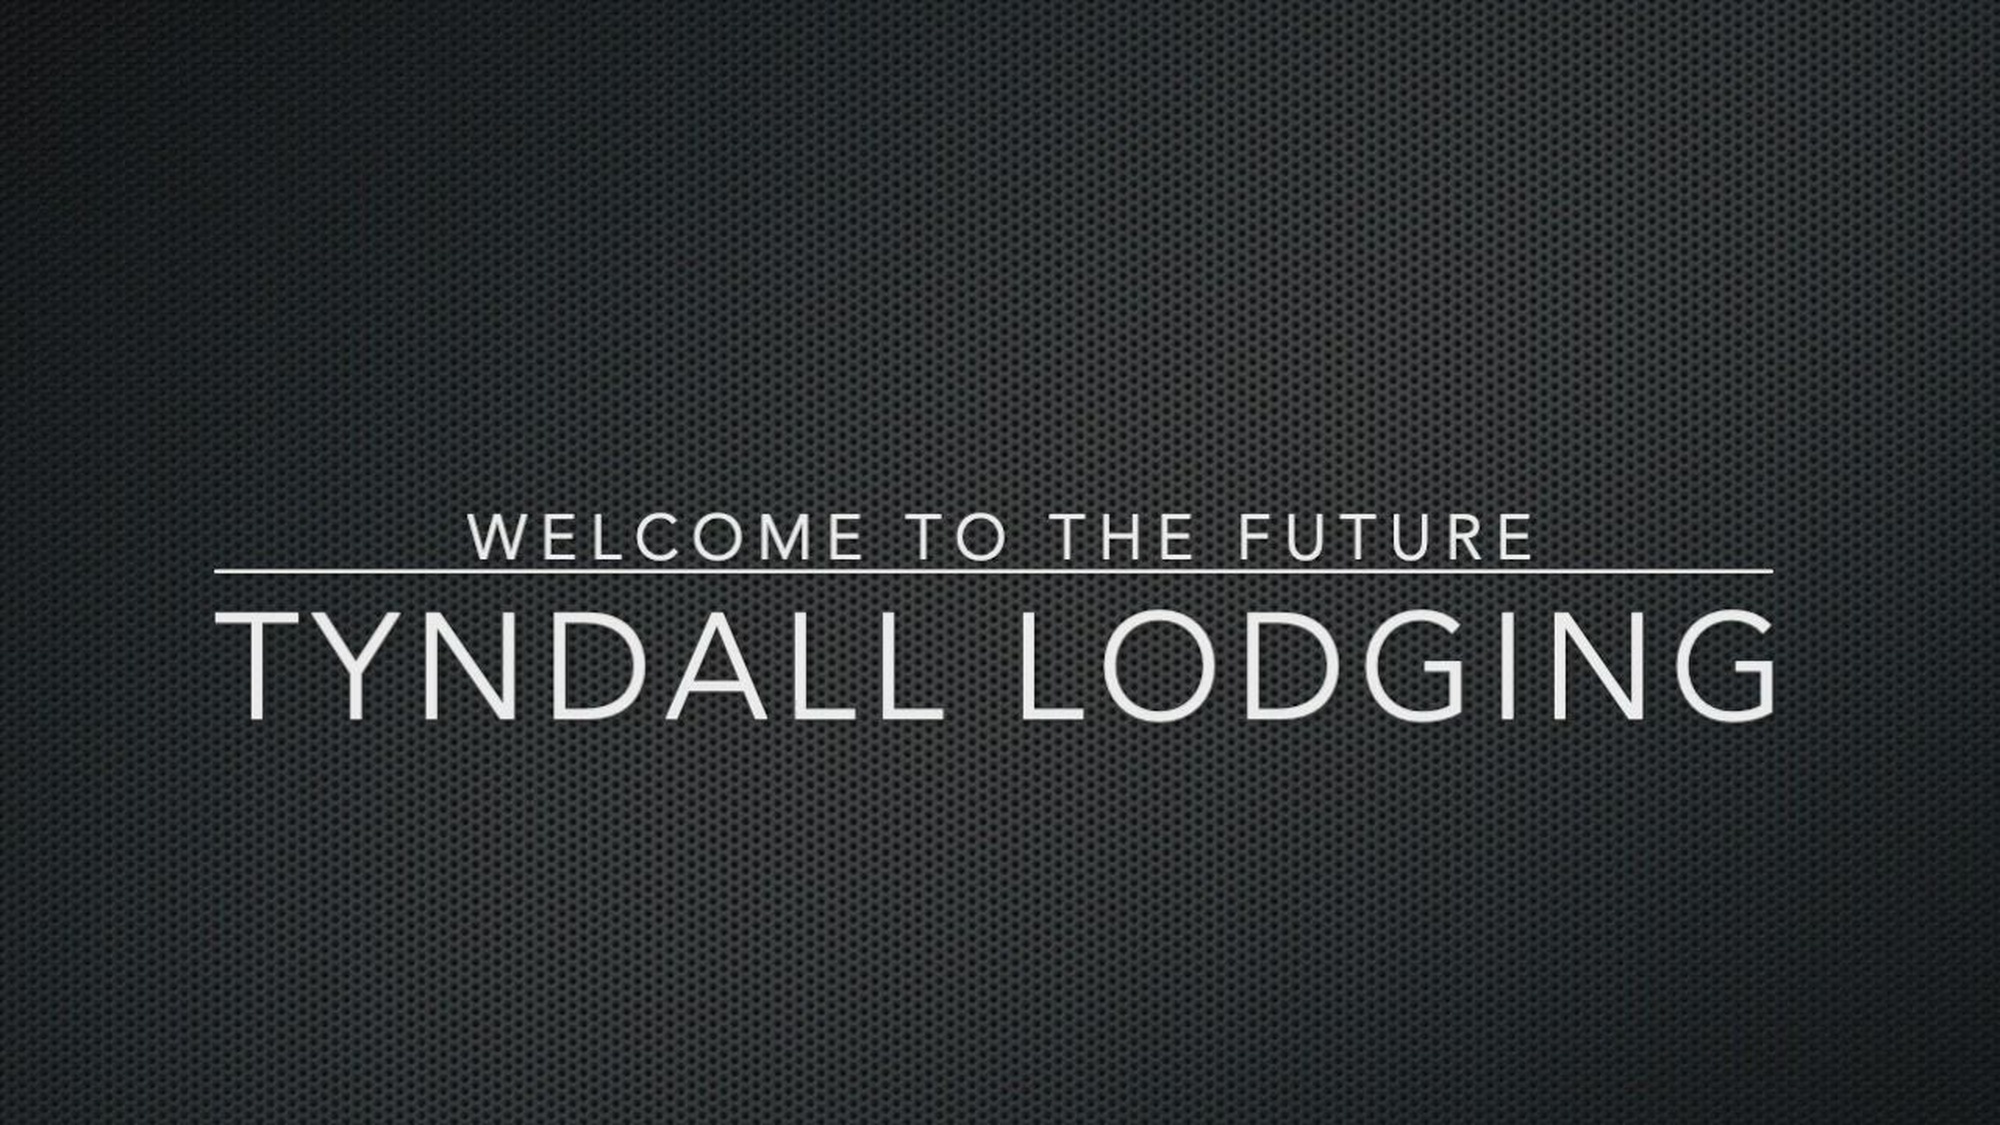 The new Tyndall Lodging facility opening in 2024.